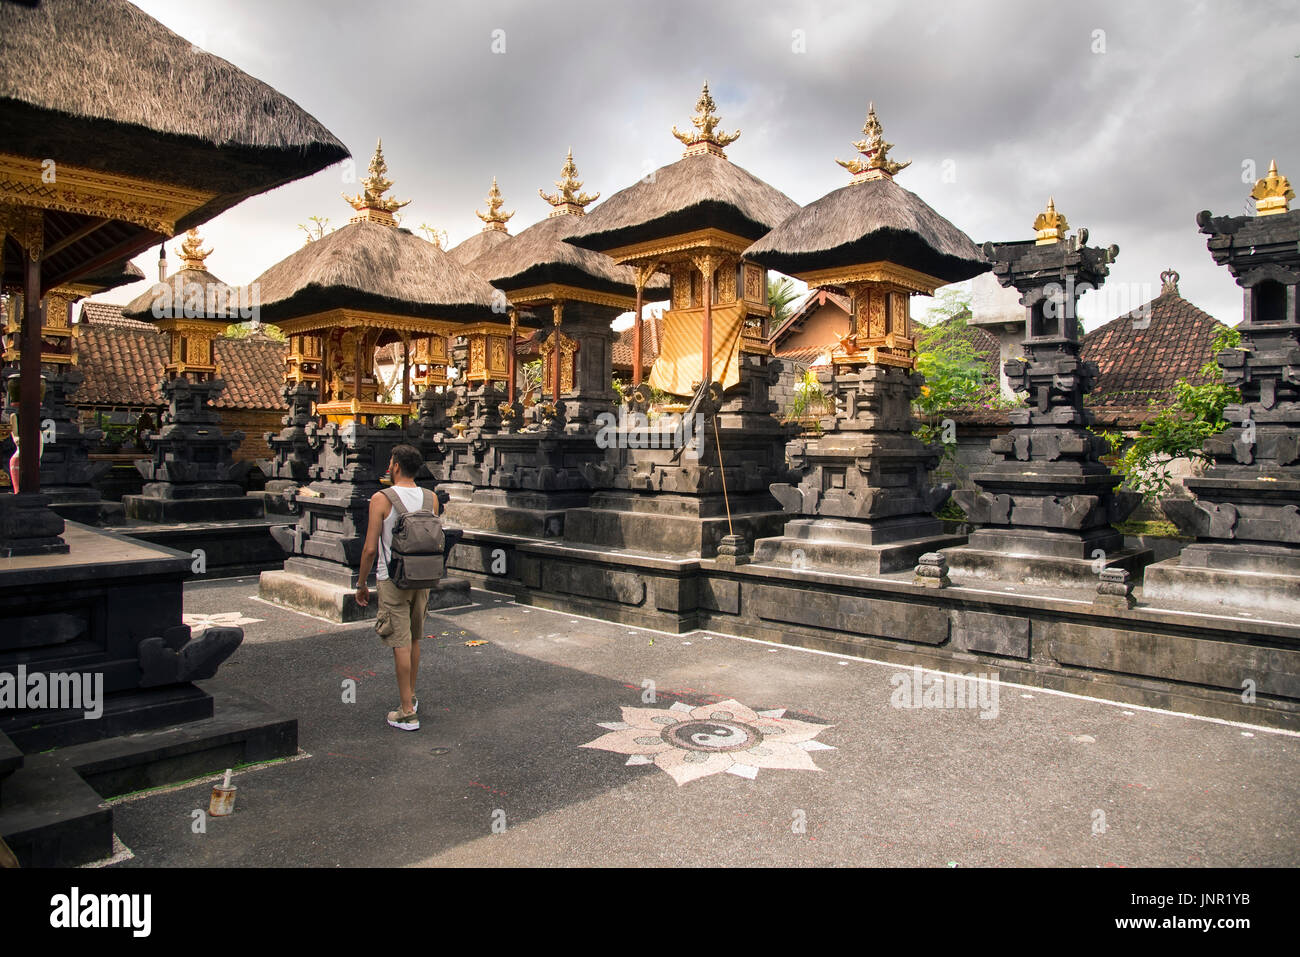 Bali, Indonesia - July 04, 2017 Garden of a house like temple in Bali  Indonesia Stock Photo - Alamy